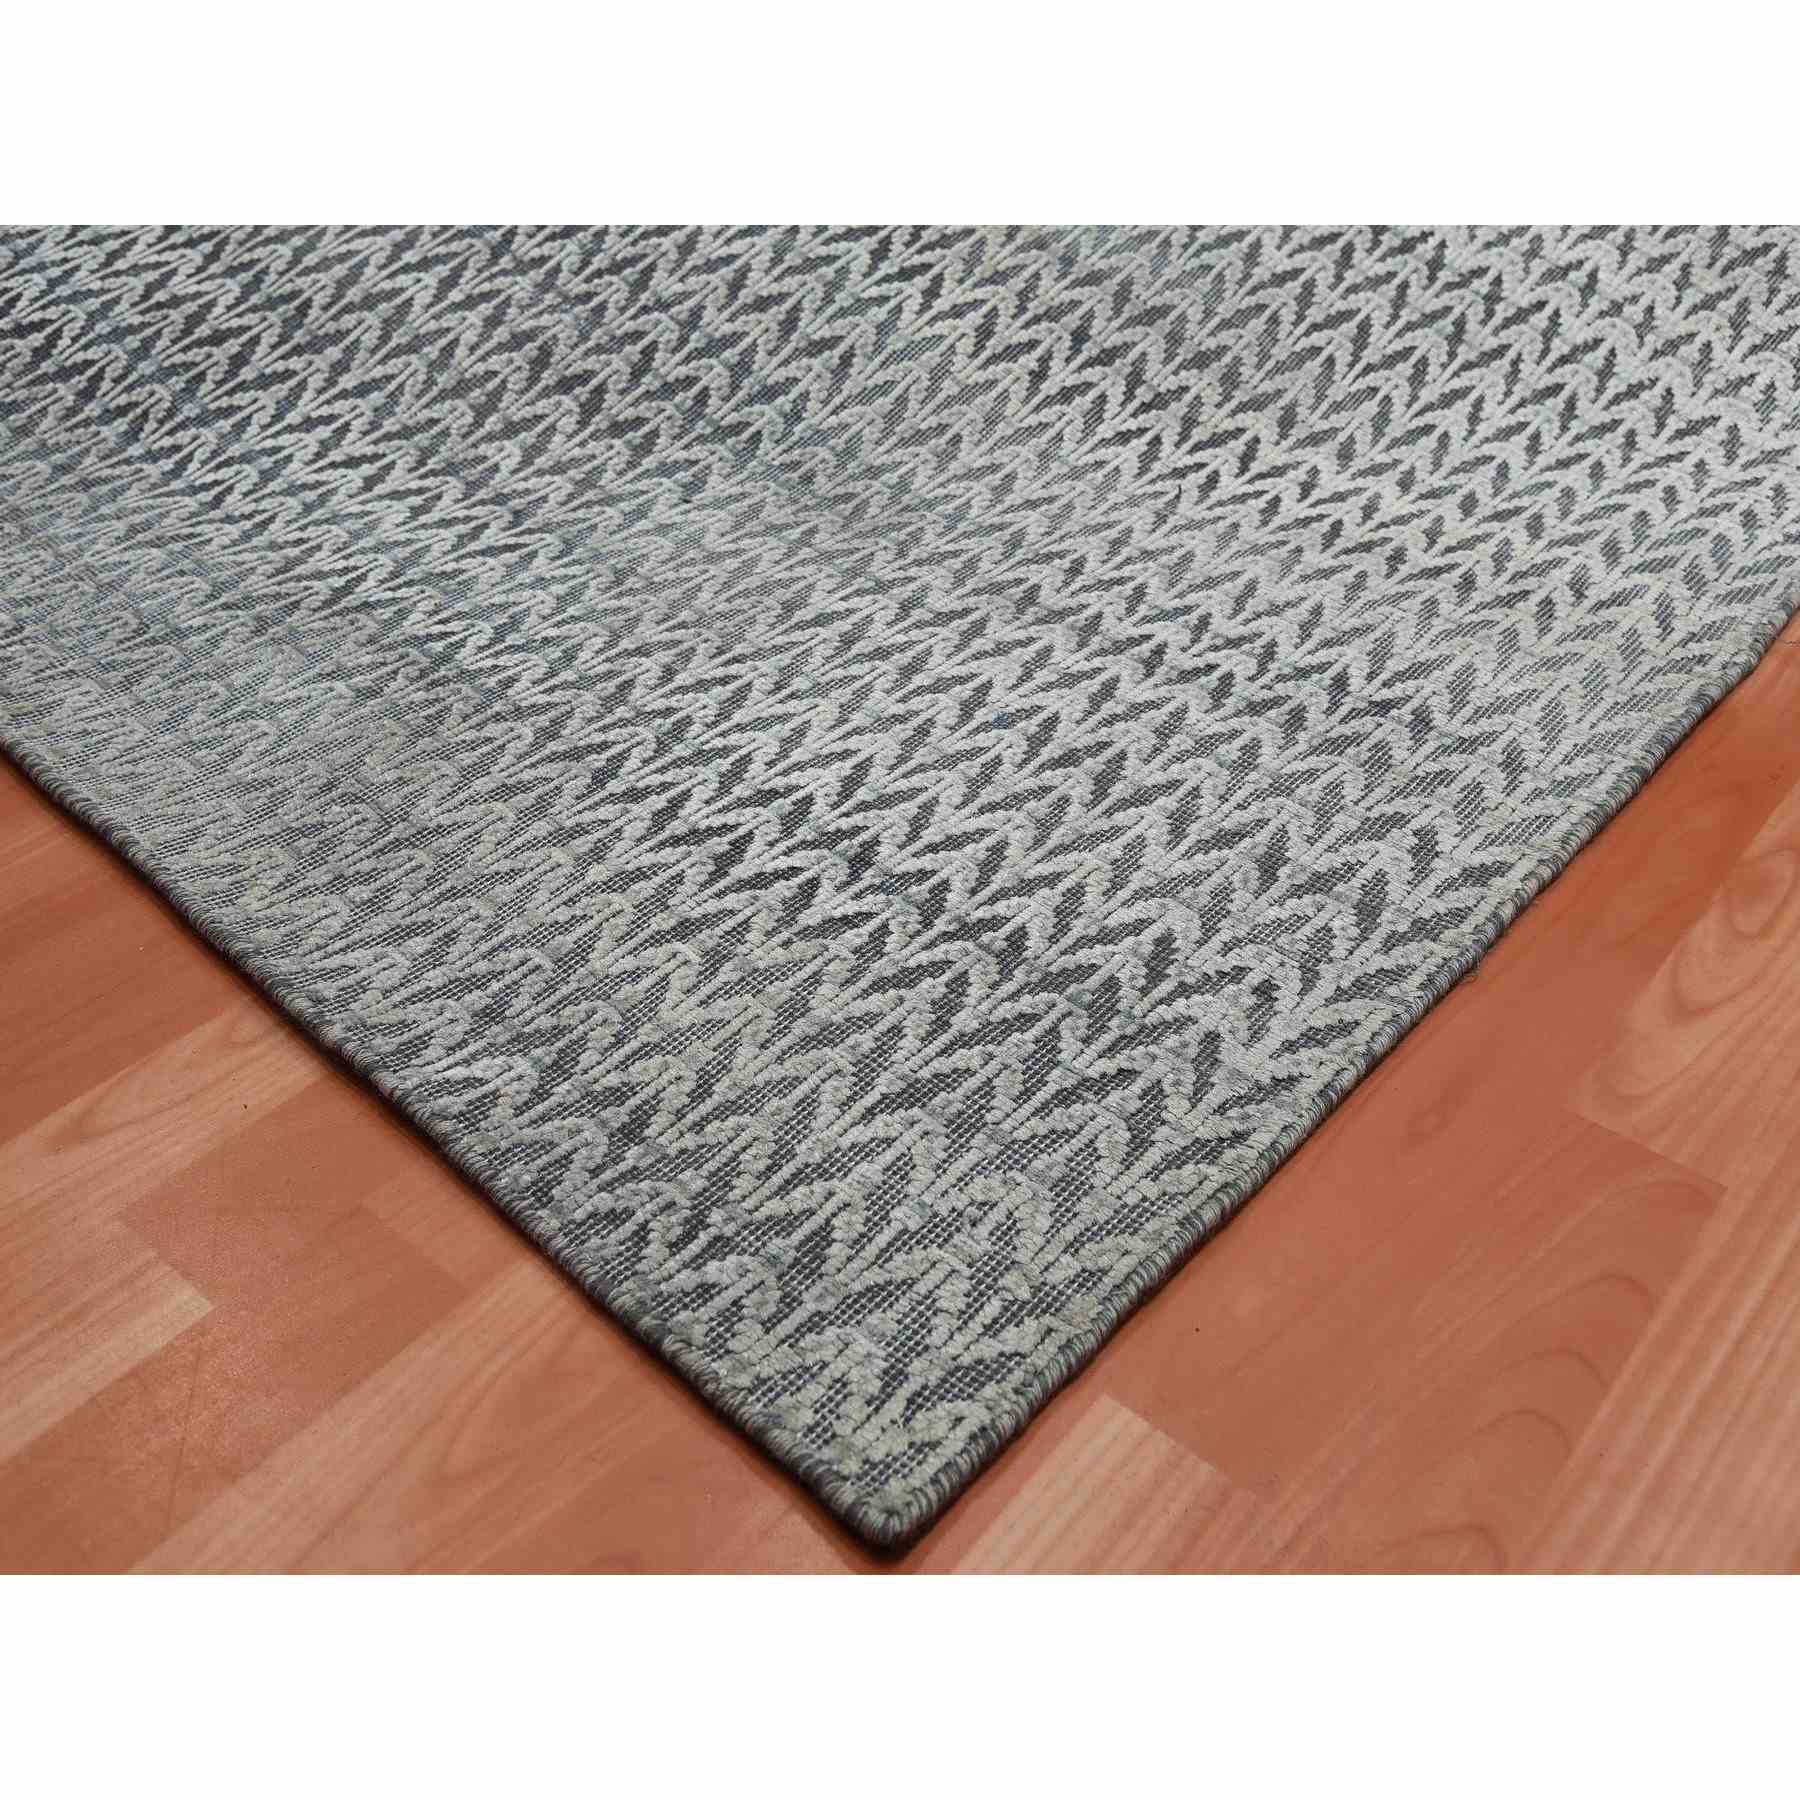 Modern-and-Contemporary-Hand-Knotted-Rug-376110